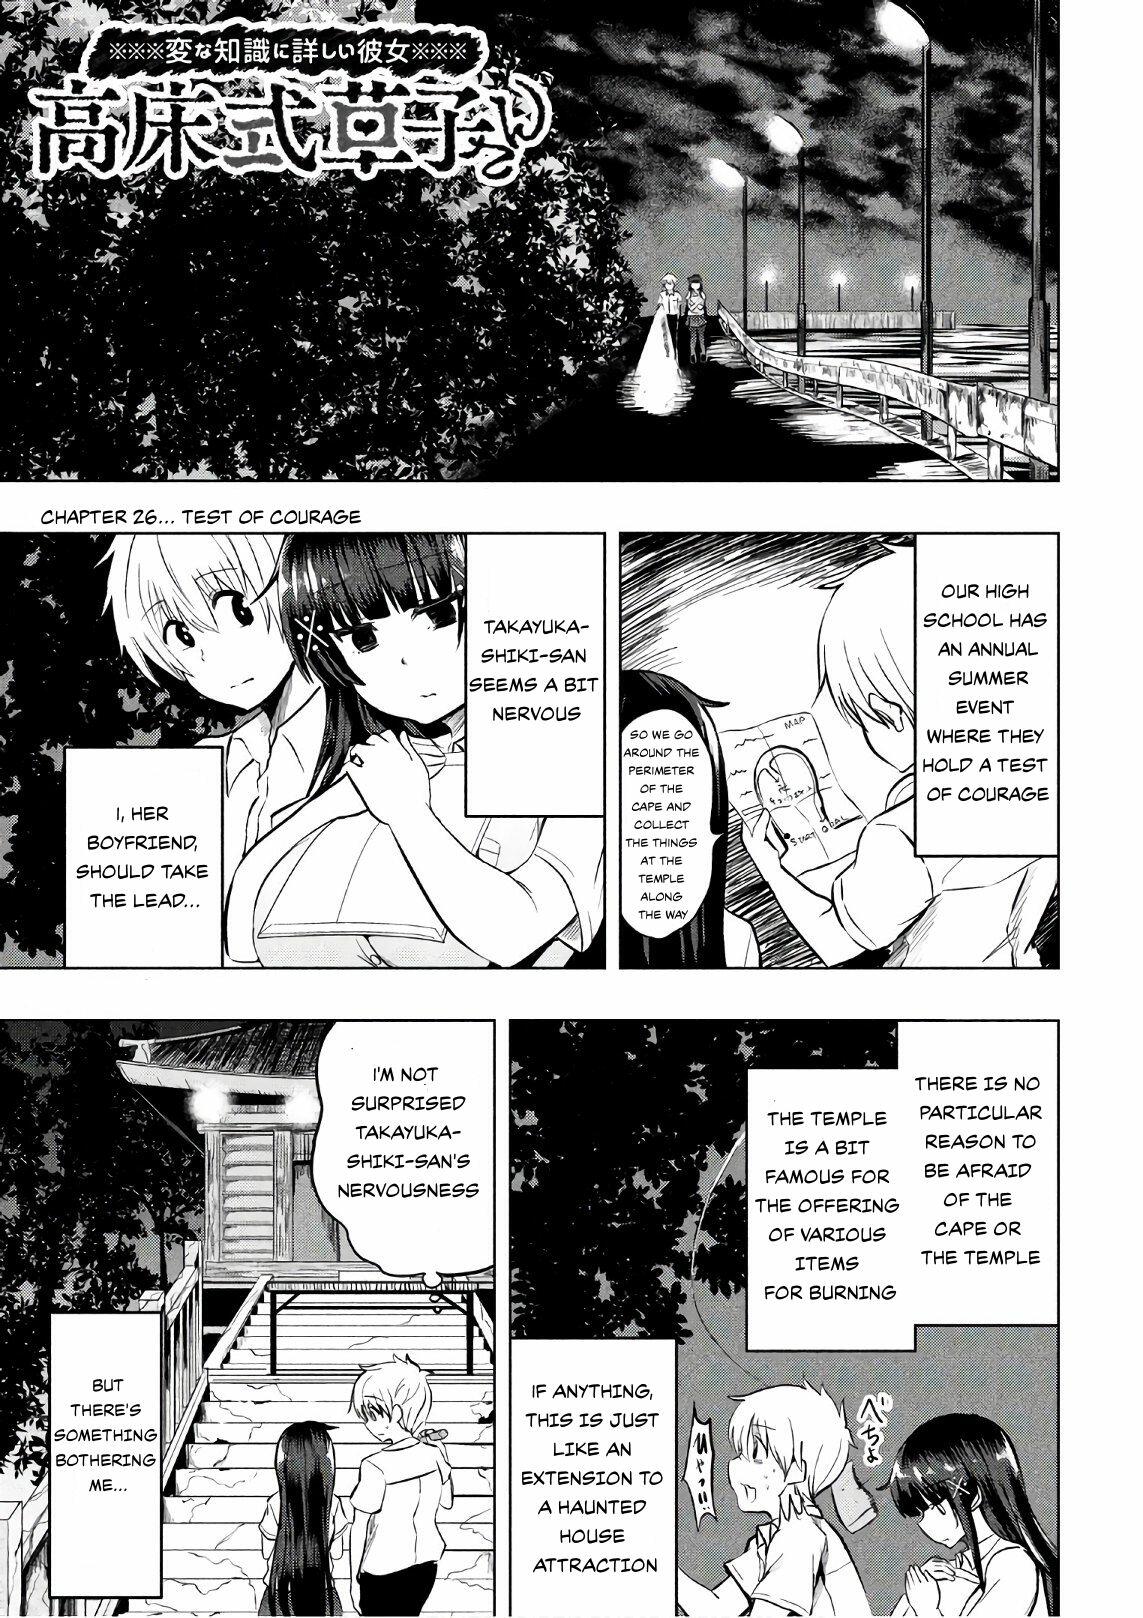 A Girl Who Is Very Well-Informed About Weird Knowledge, Takayukashiki Souko-San Chapter 26: Test Of Courage page 1 - Mangakakalots.com